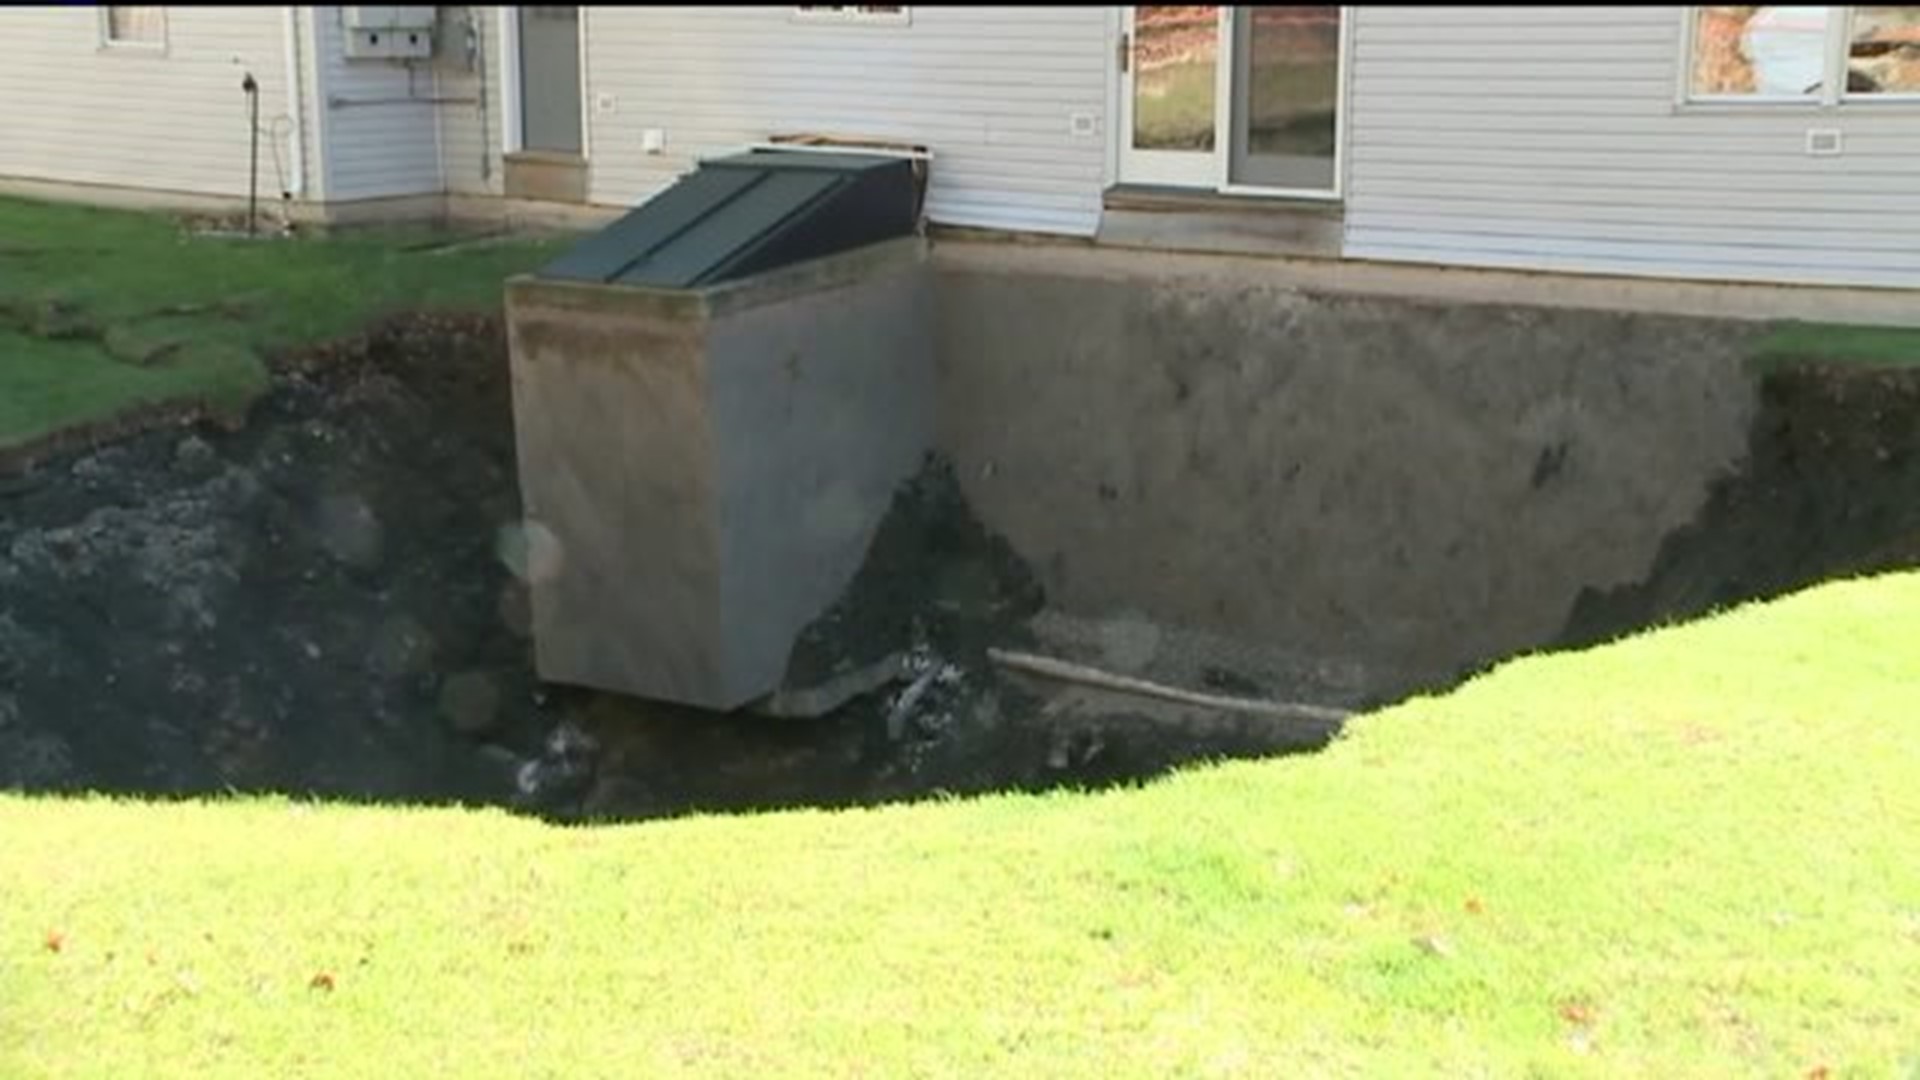 Family Fears Backyard Hole Could Swallow Home